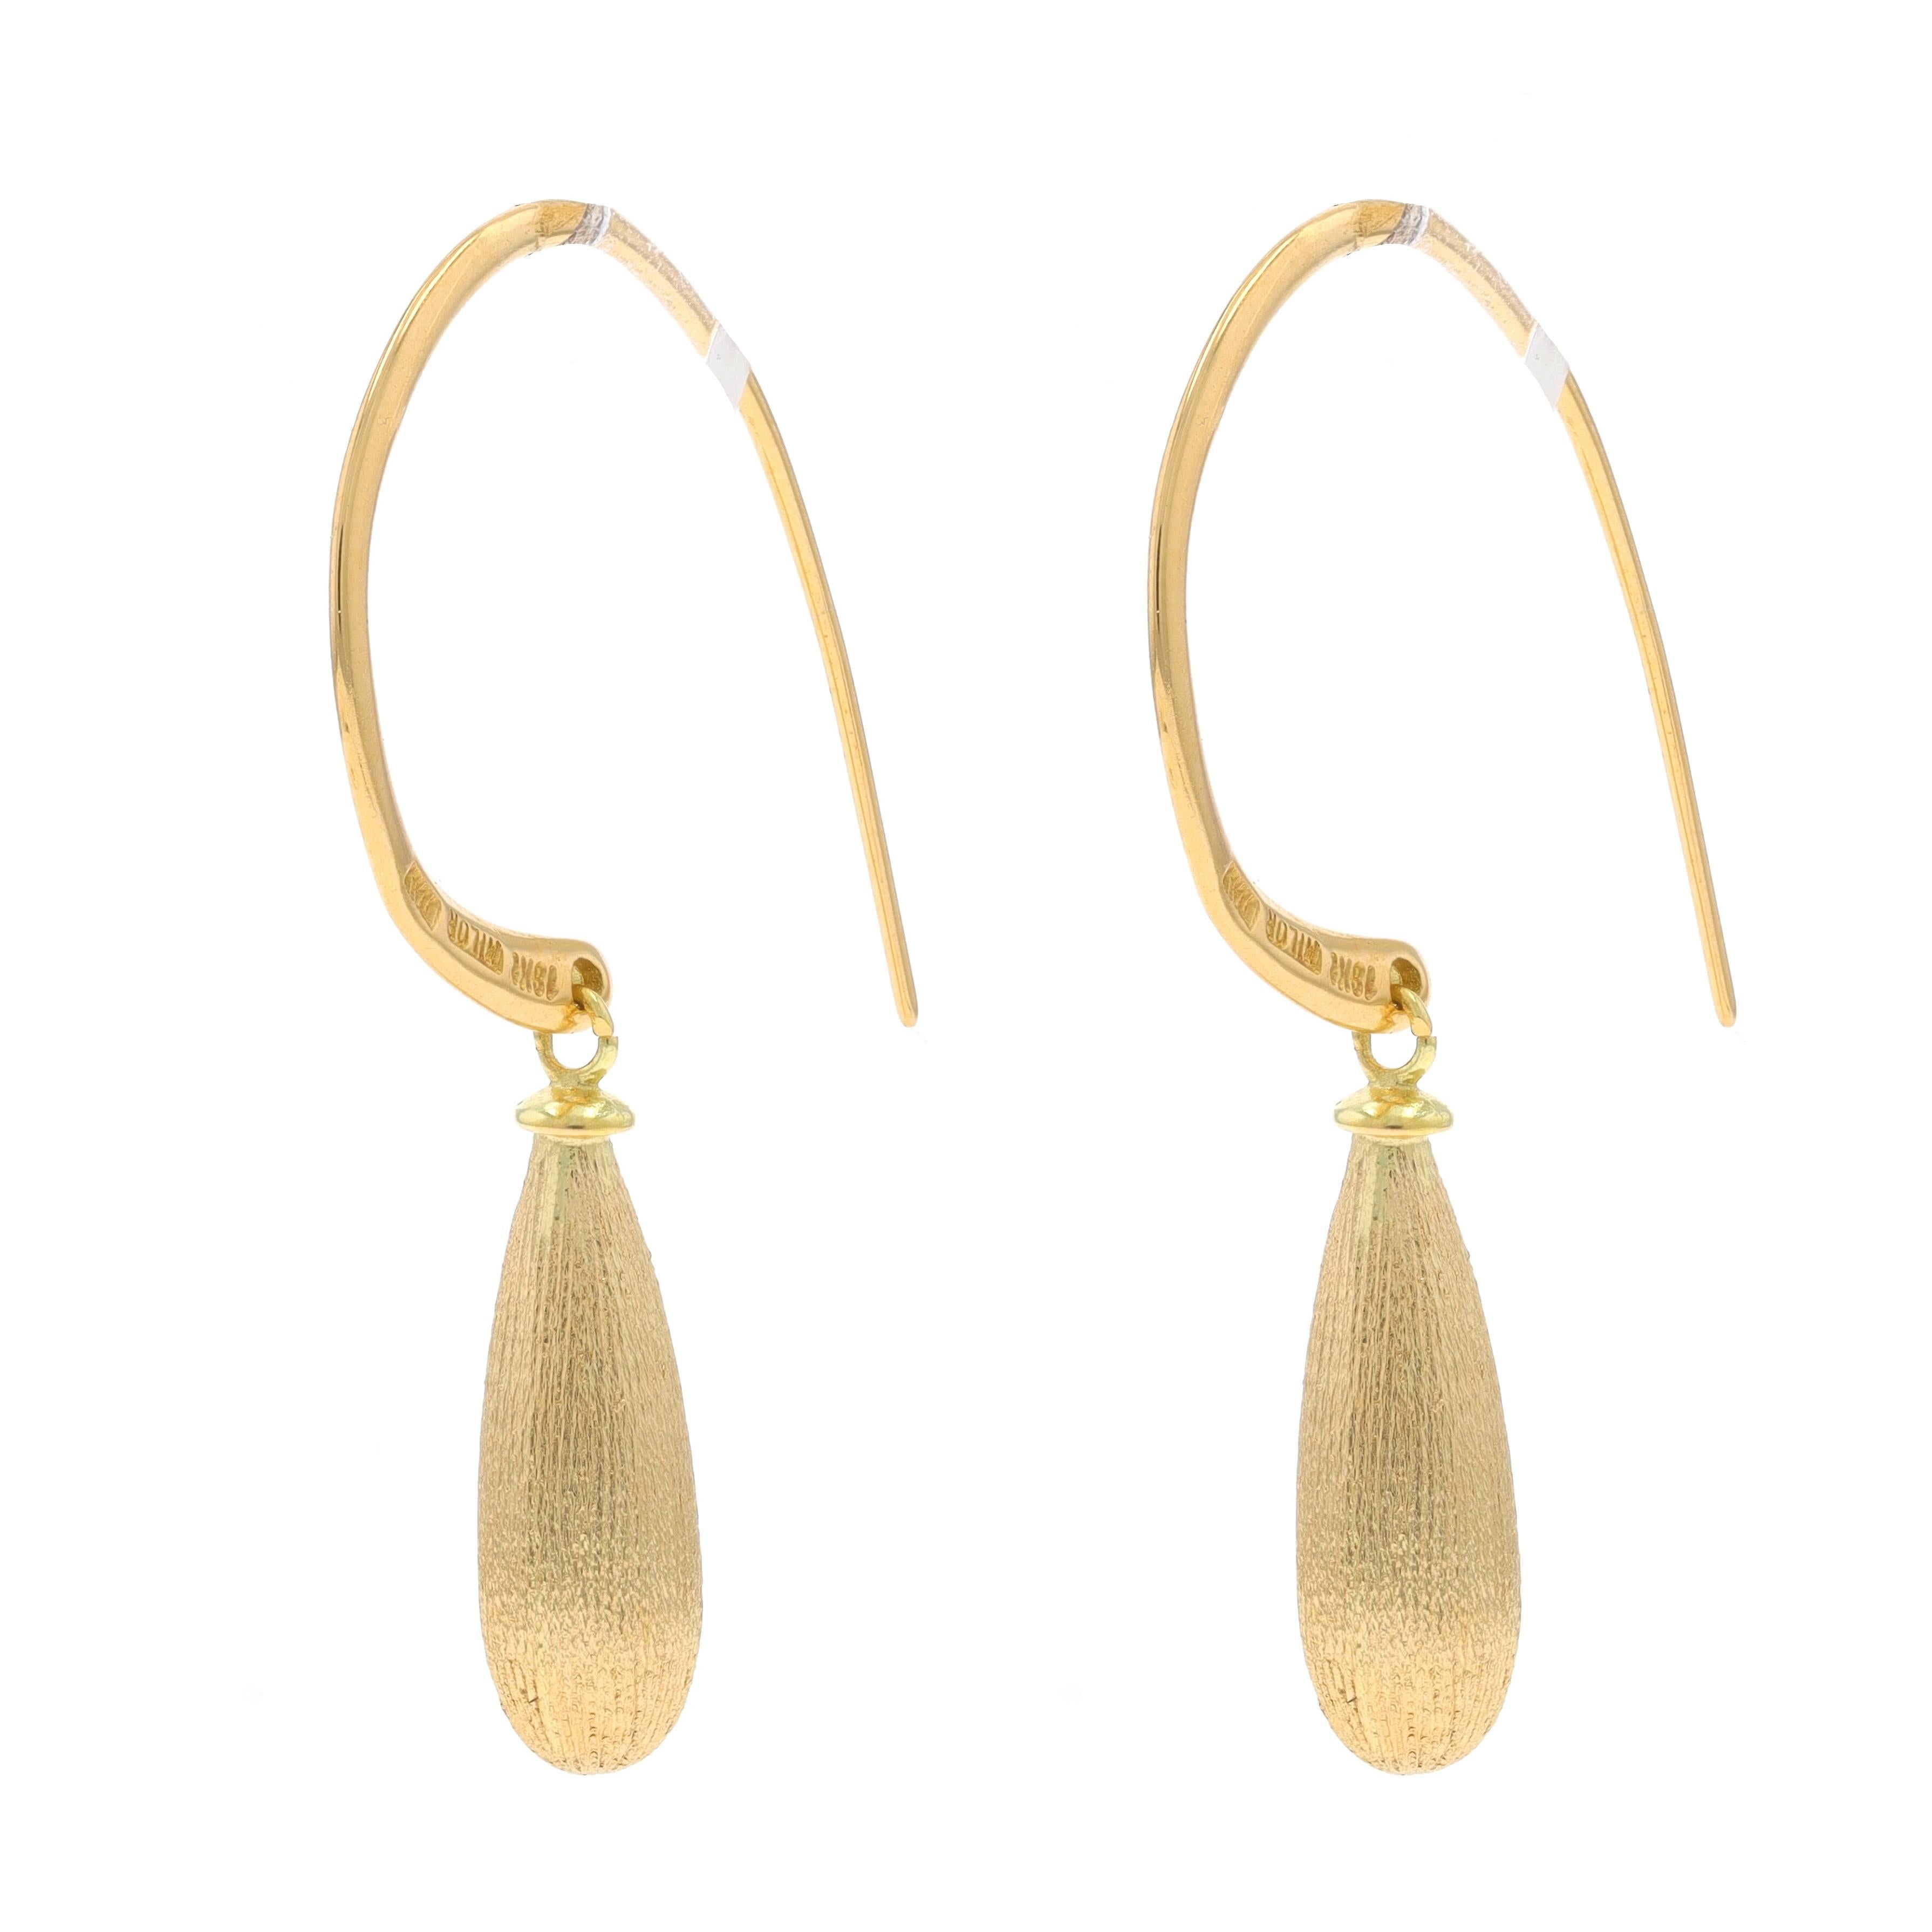 Milor Teardrop Dangle Earrings - Yellow Gold 18k Italy Brushed Pierced In Excellent Condition For Sale In Greensboro, NC